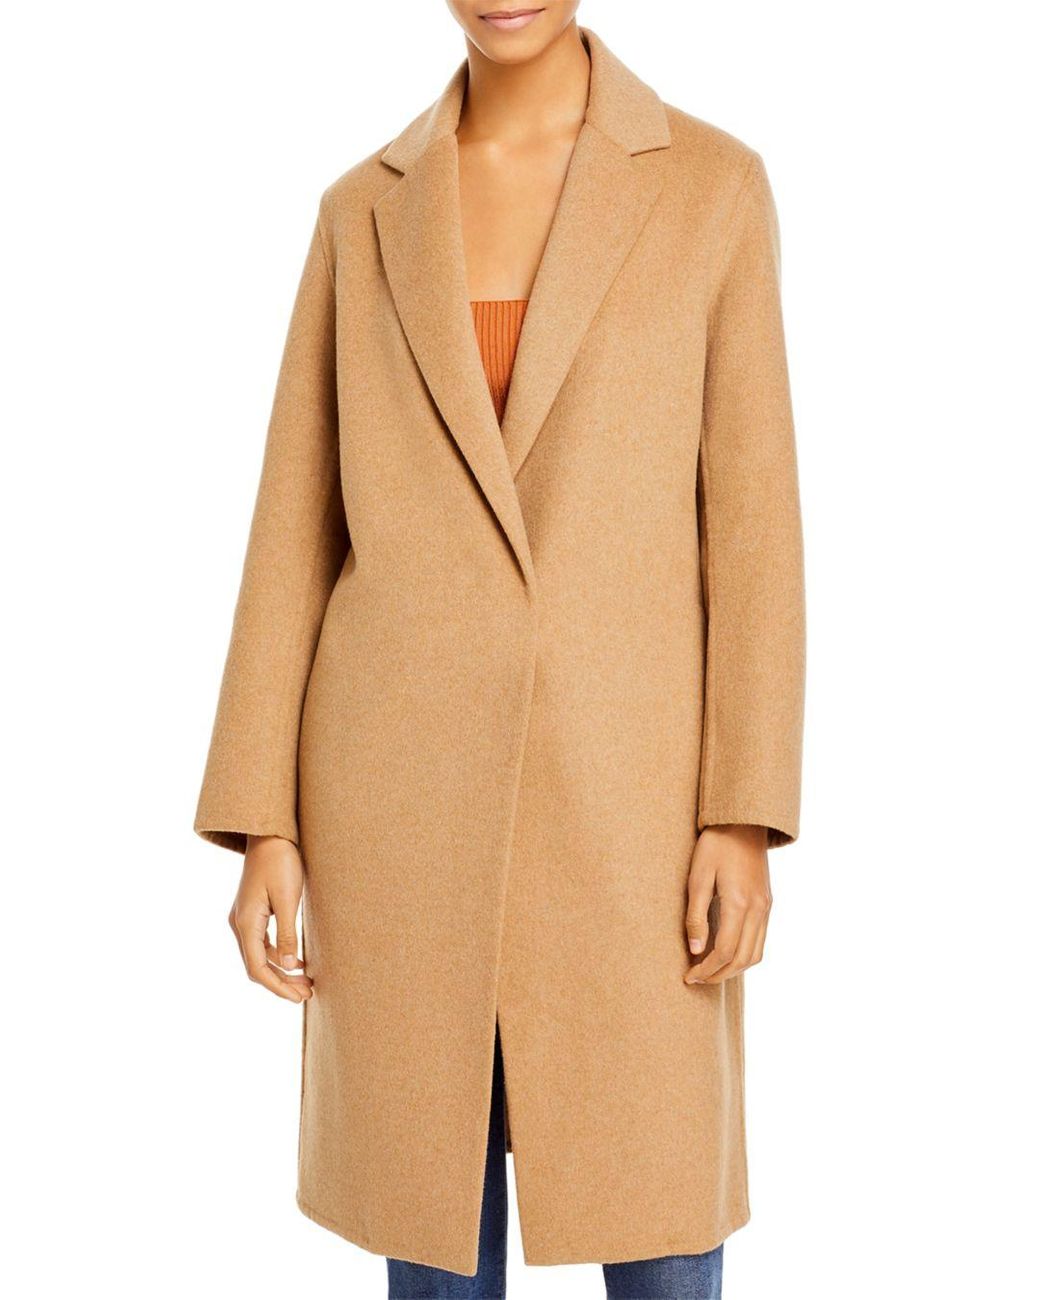 Vince Wool Classic Coat in Camel (Natural) - Lyst